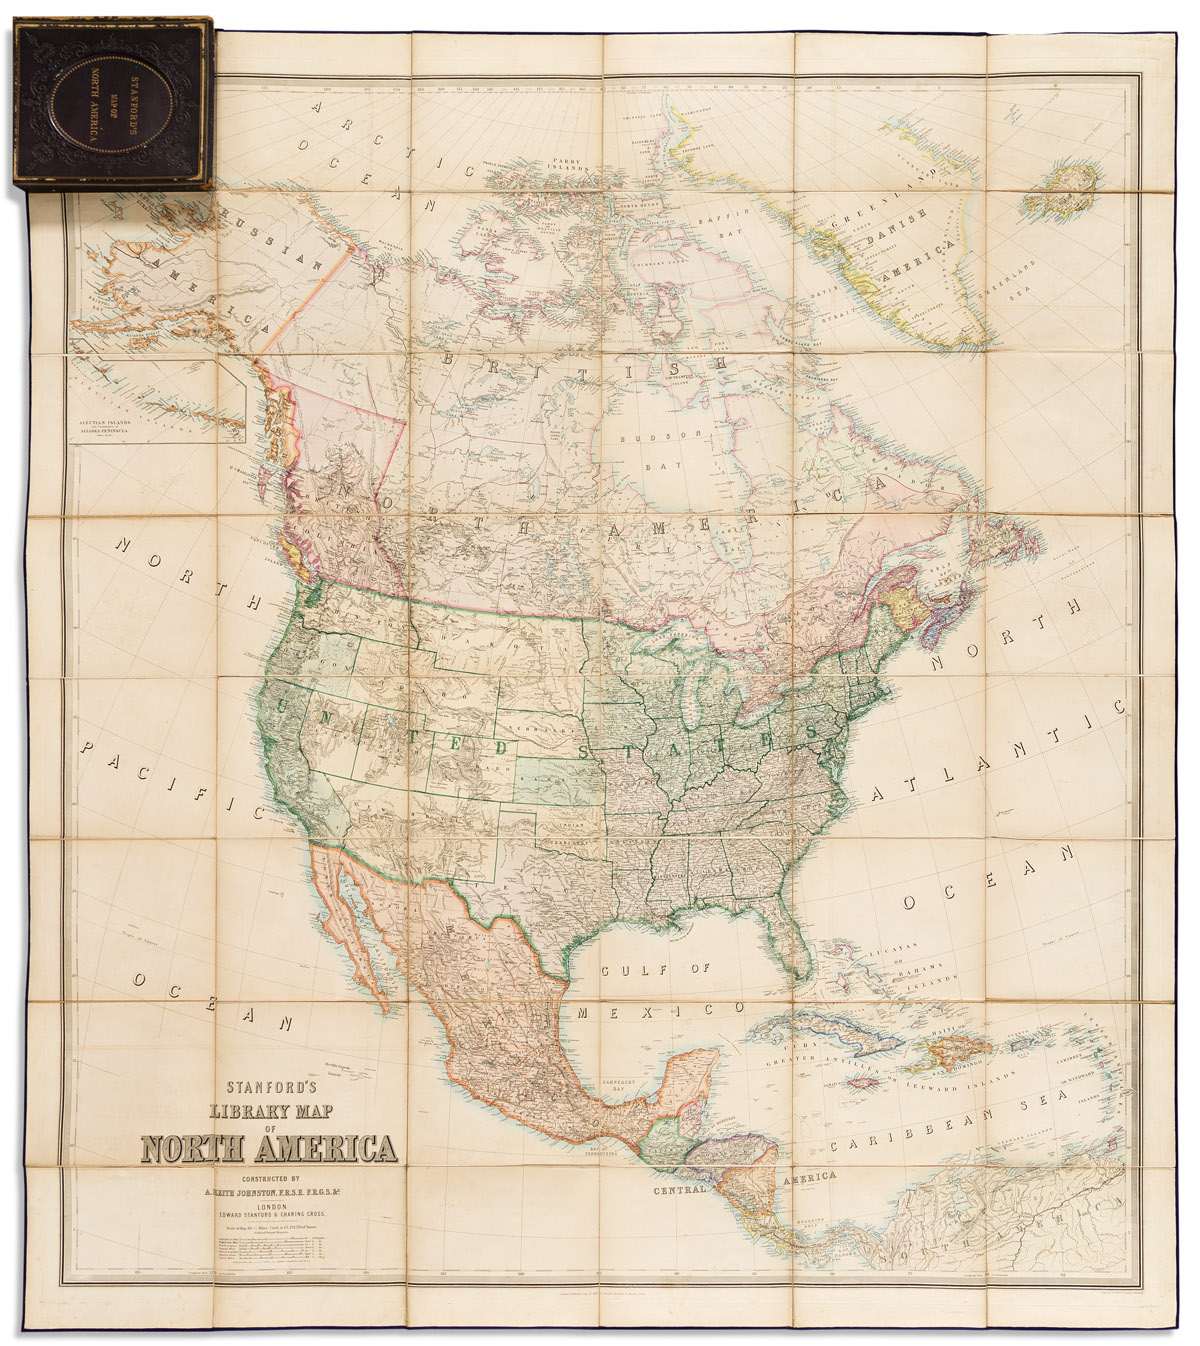 Stanford's Library Map of North America.